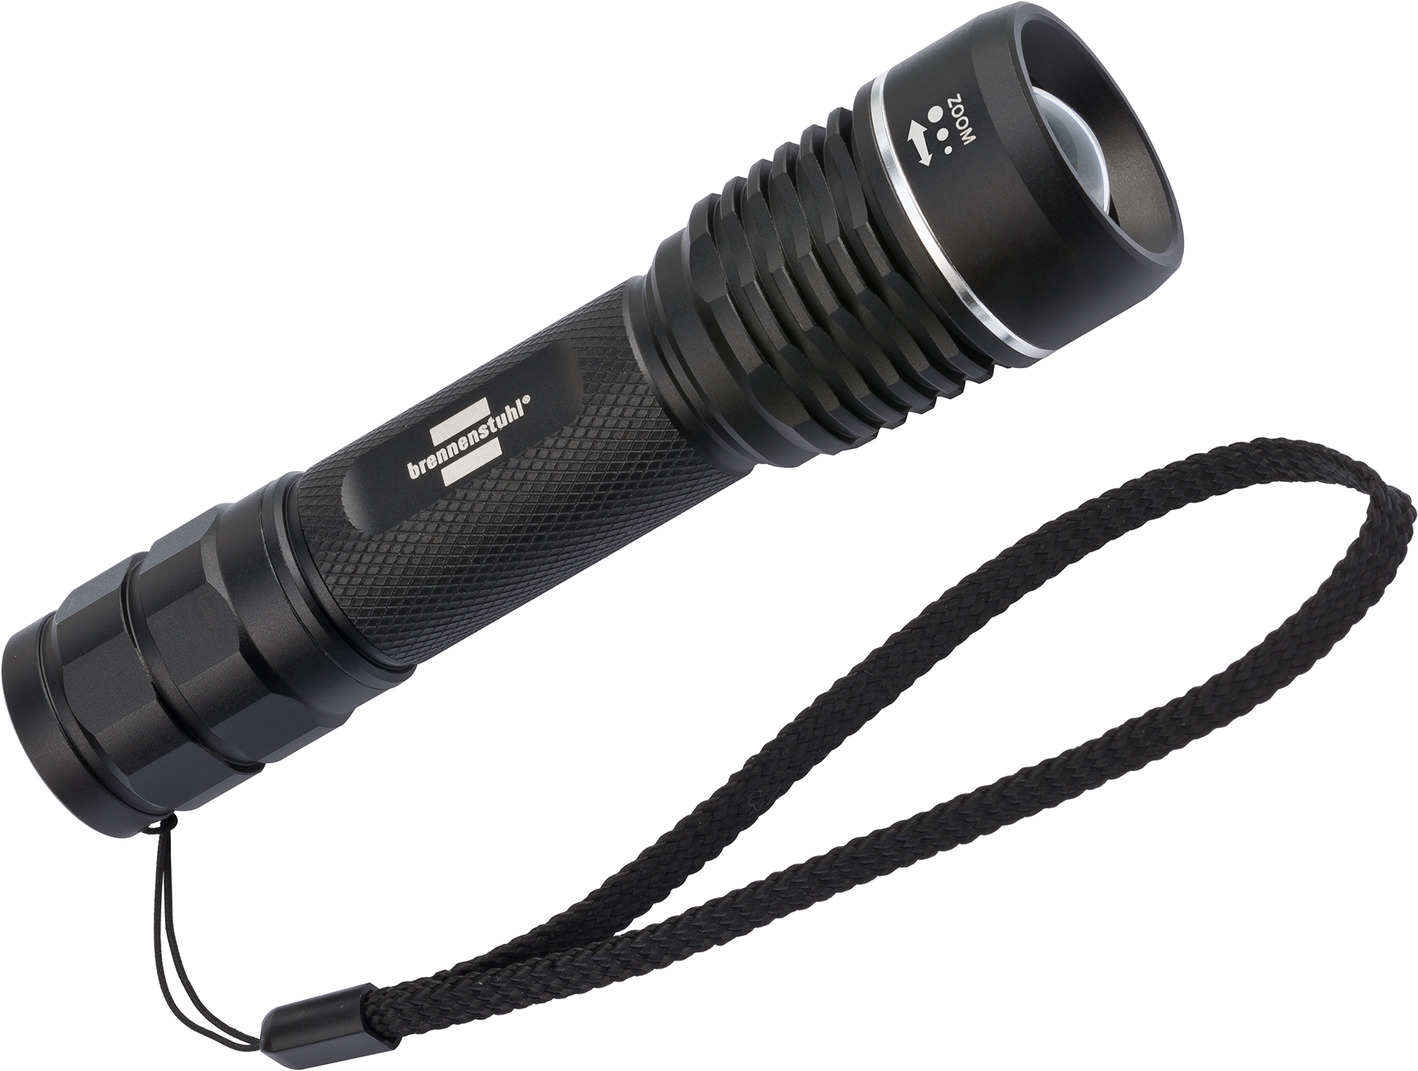 3W Waterproof Super Bright LED Flashlight Focus Torch Lamp With Hand Strap NJU 